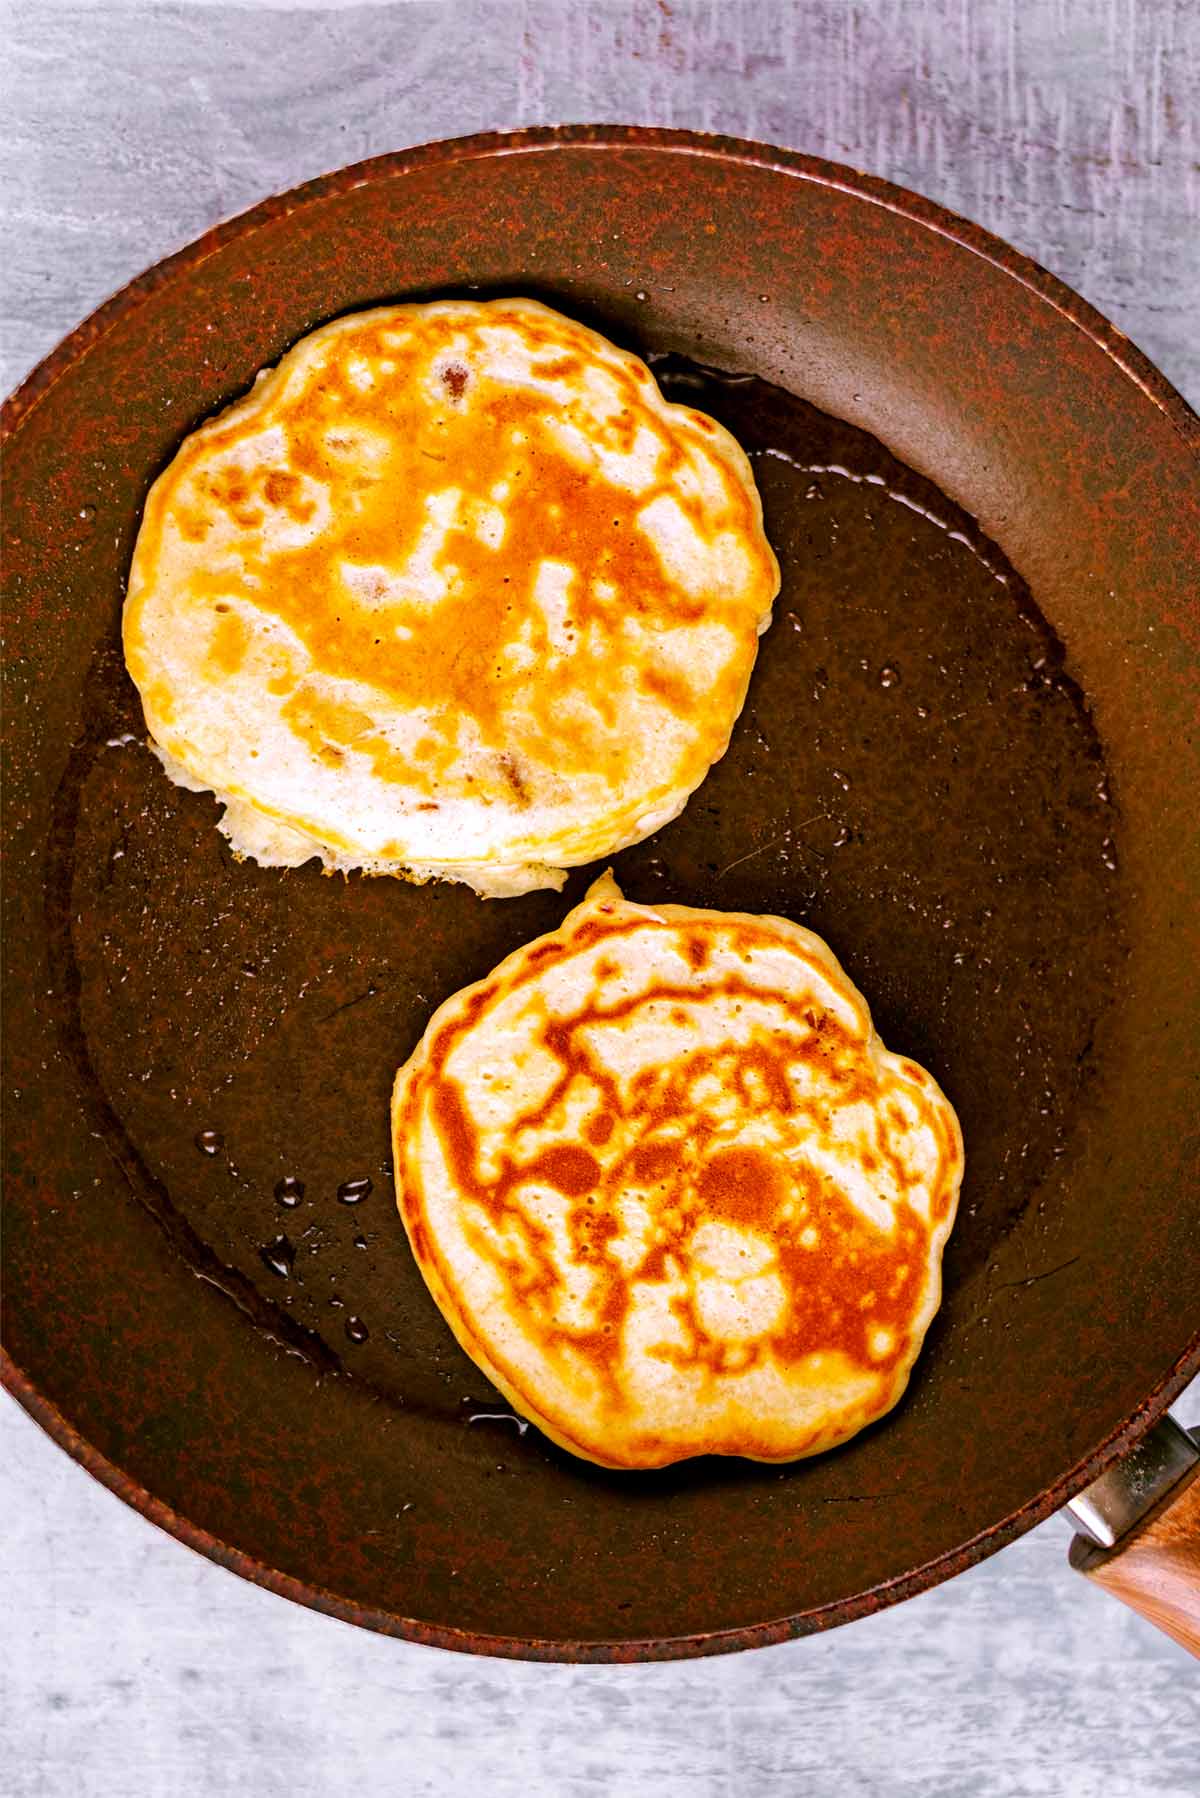 A frying pan with two pancakes being cooked in it.